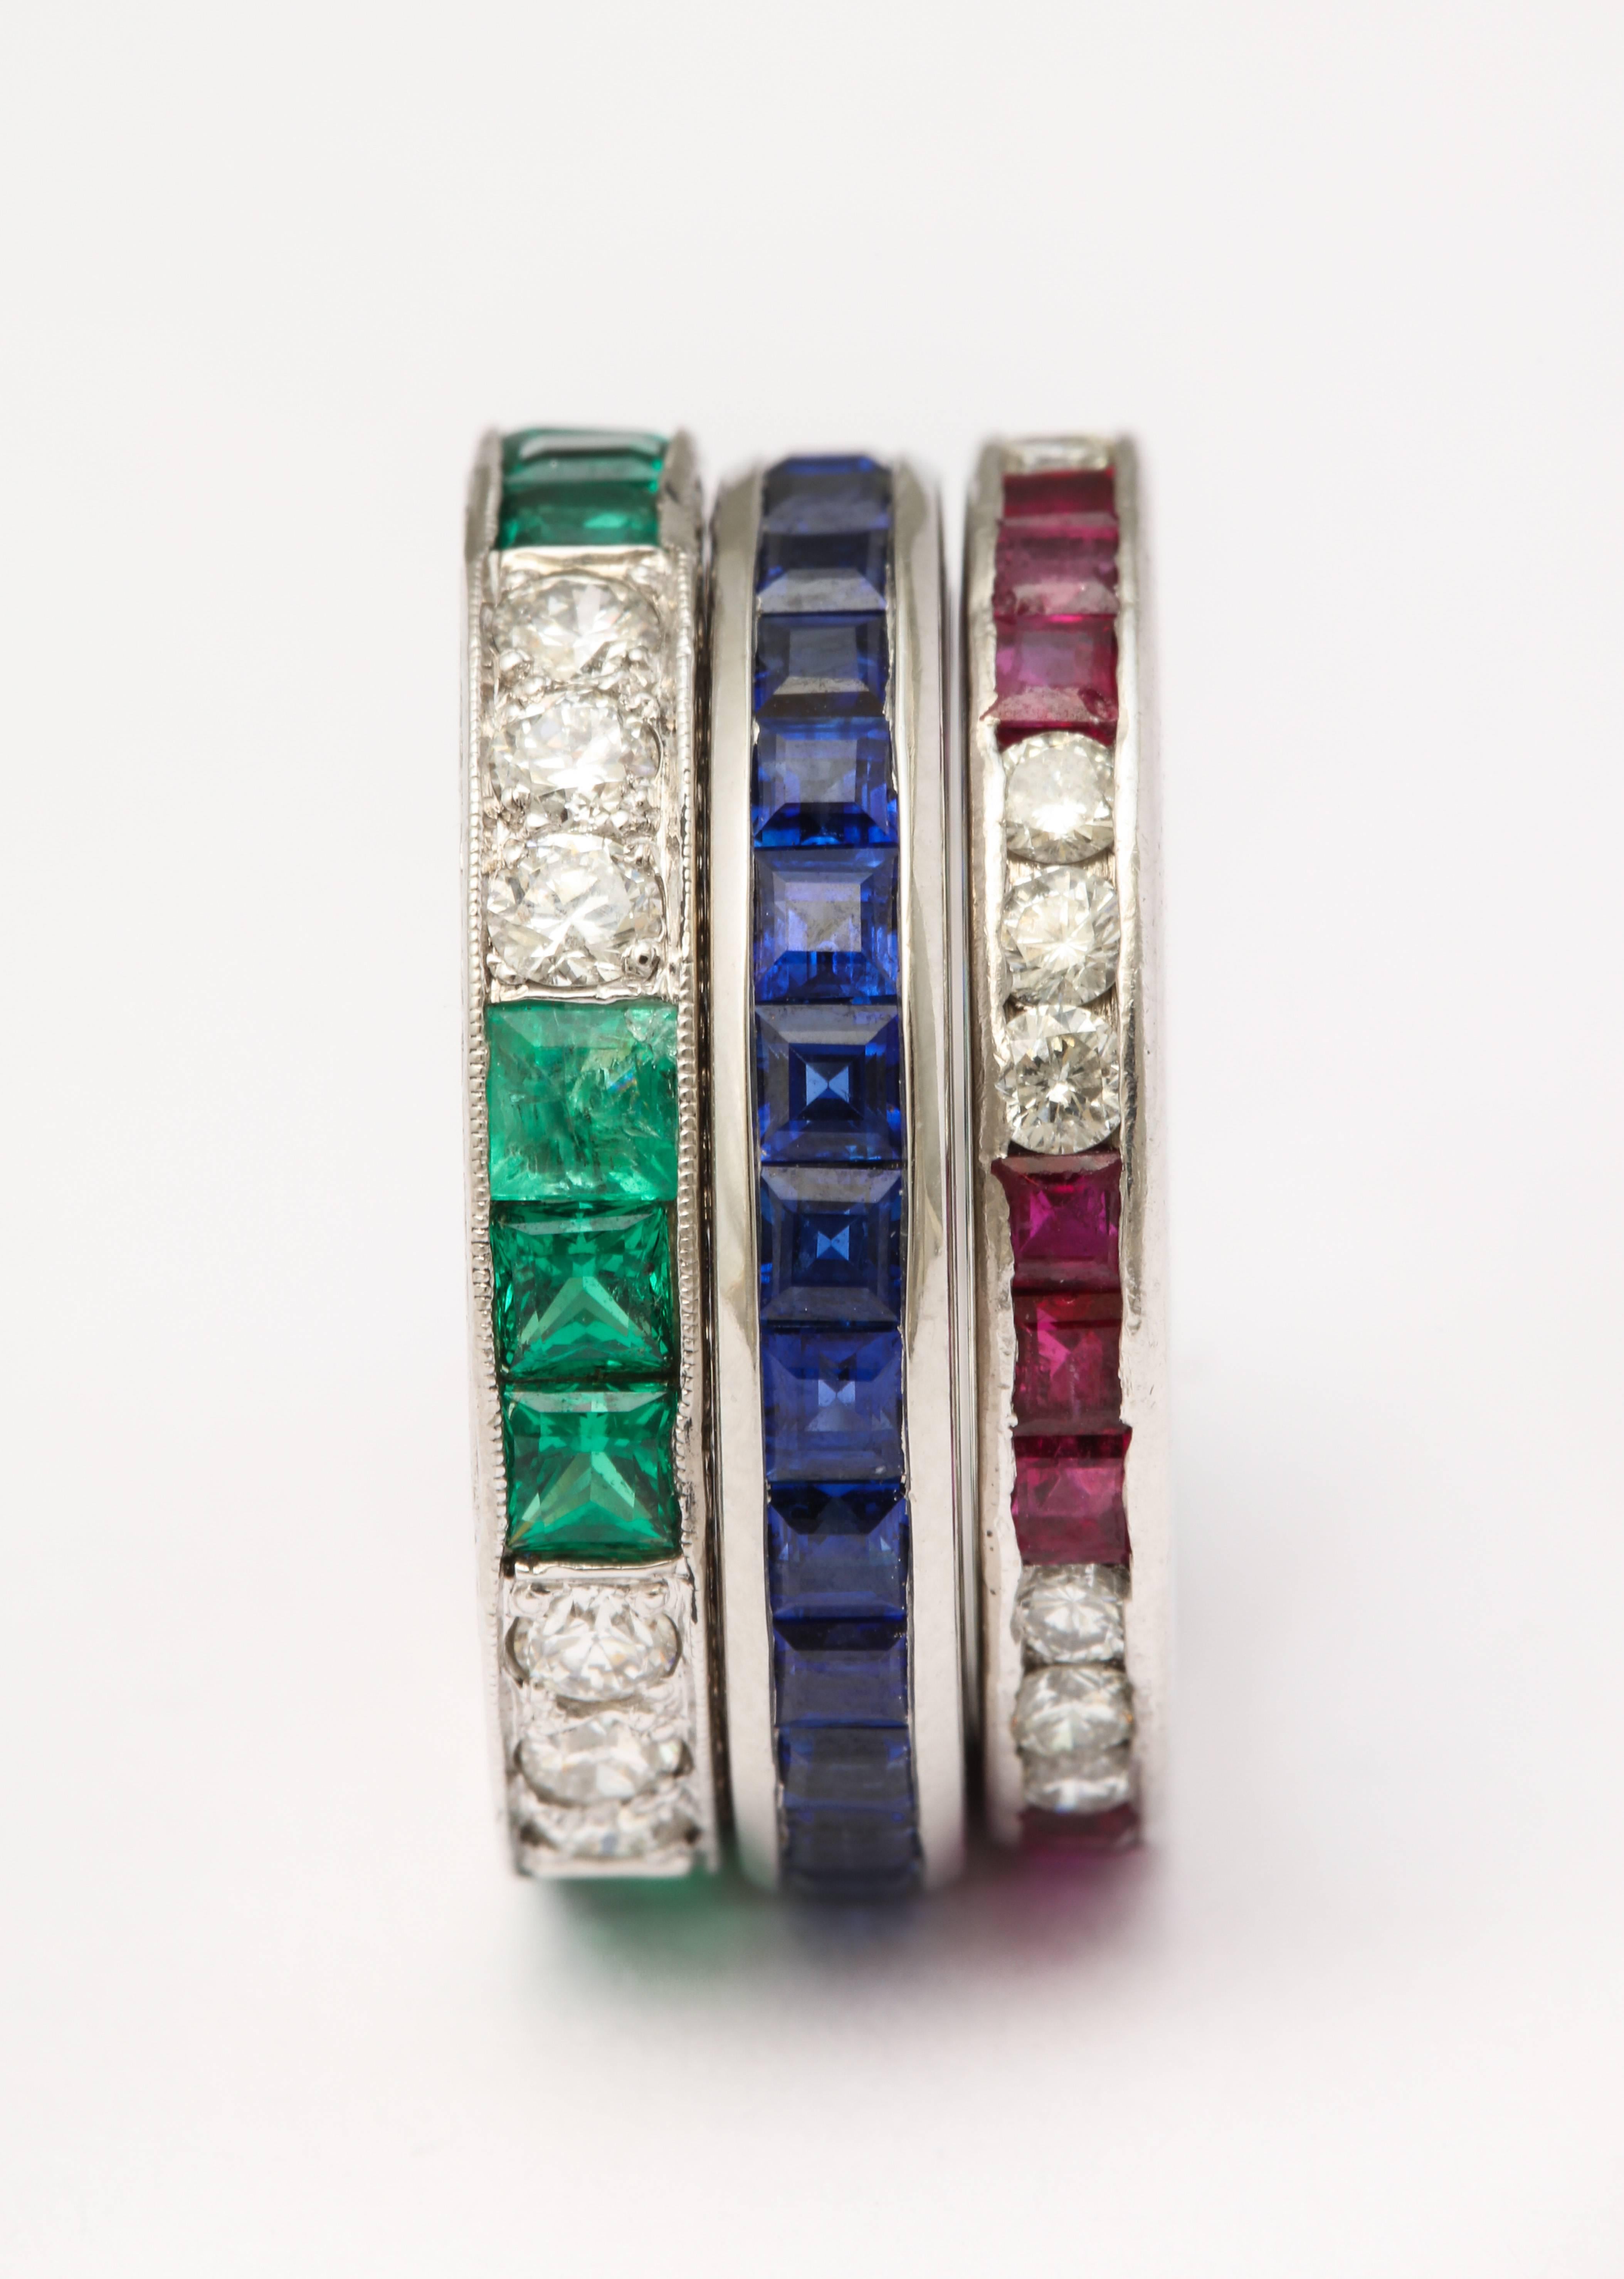 Wedding Bands of Diamonds, Sapphires, Rubies and Emeralds Set in Platinum 2